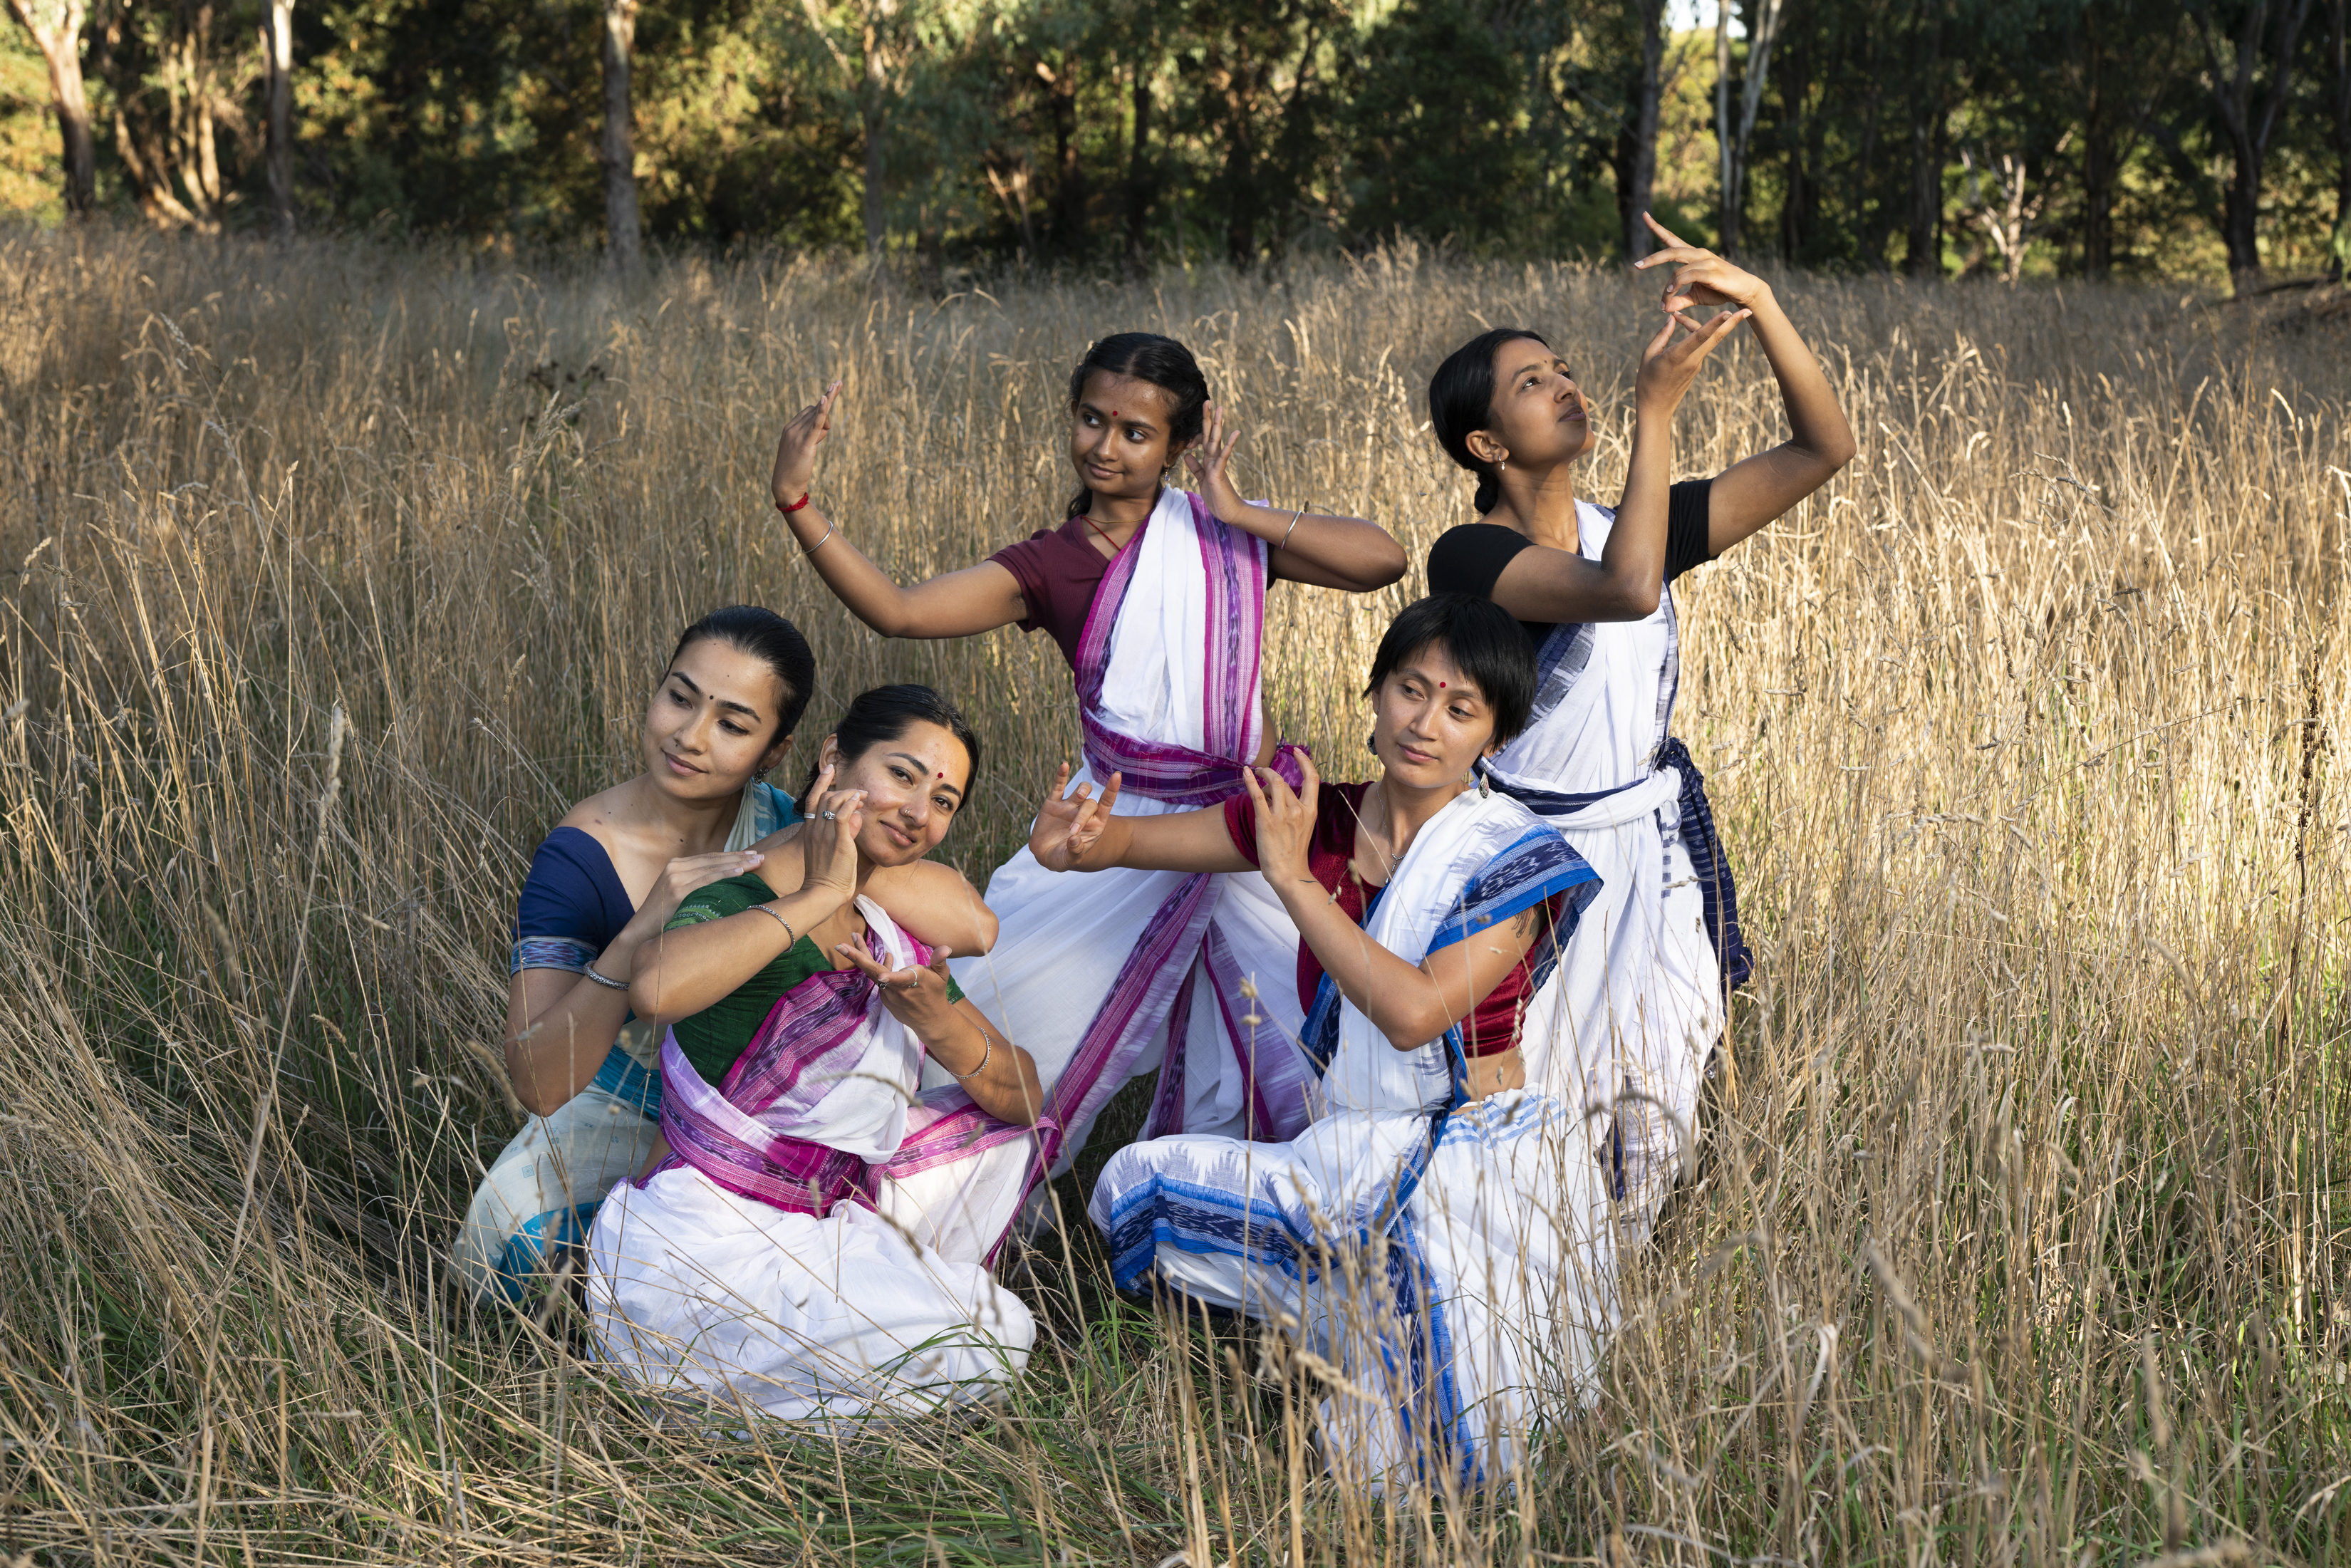 five Odissi dancers are wearing white sarees and posing in a field of wheat